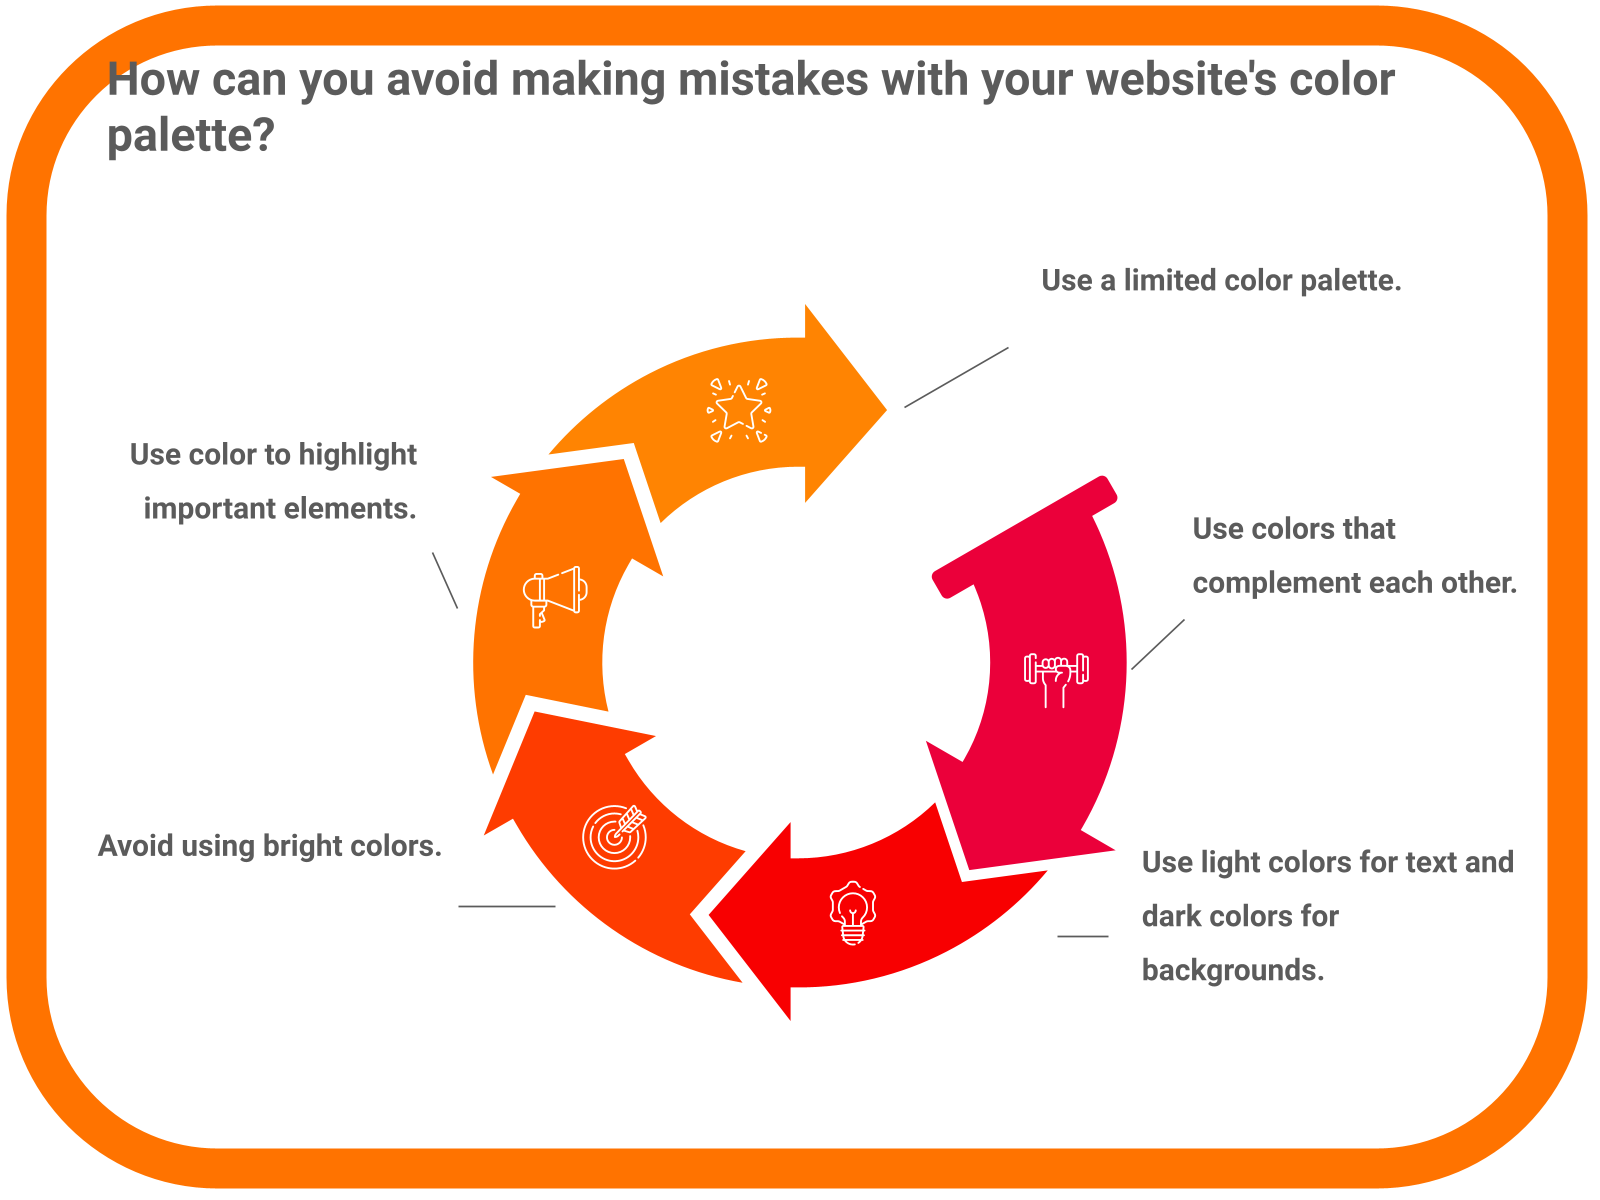 How can you avoid making mistakes with your website’s design?